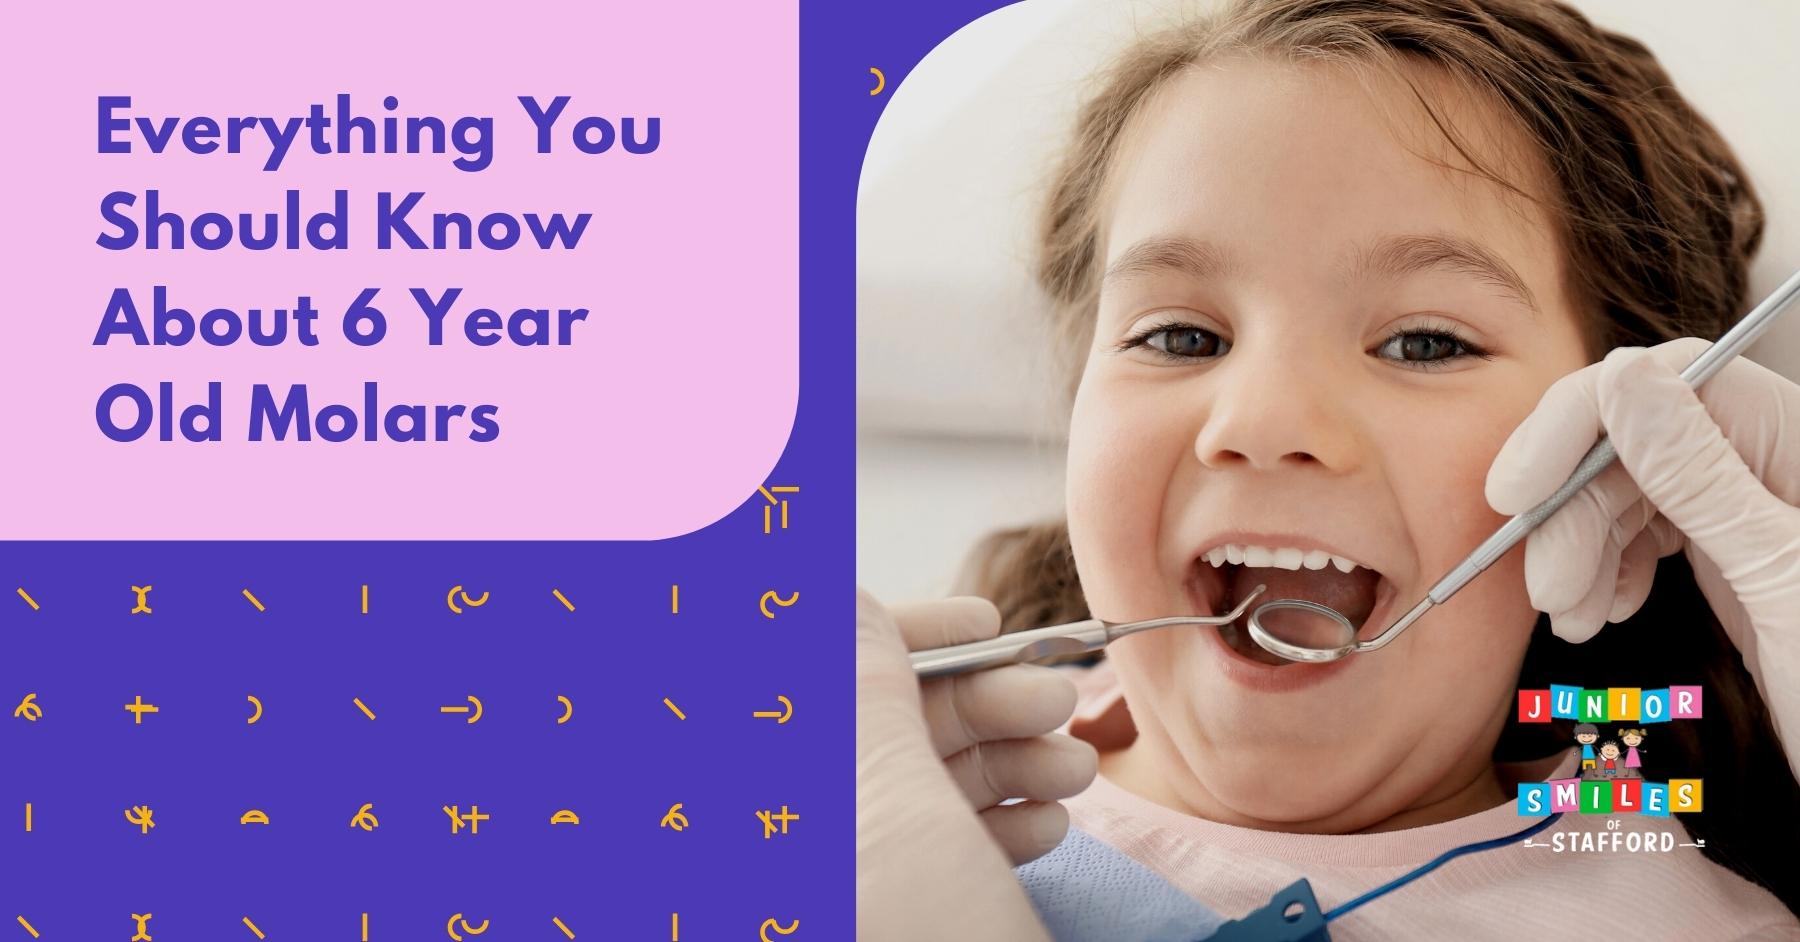 Everything You Should Know About 6 Year Old Molars Junior Smiles Of